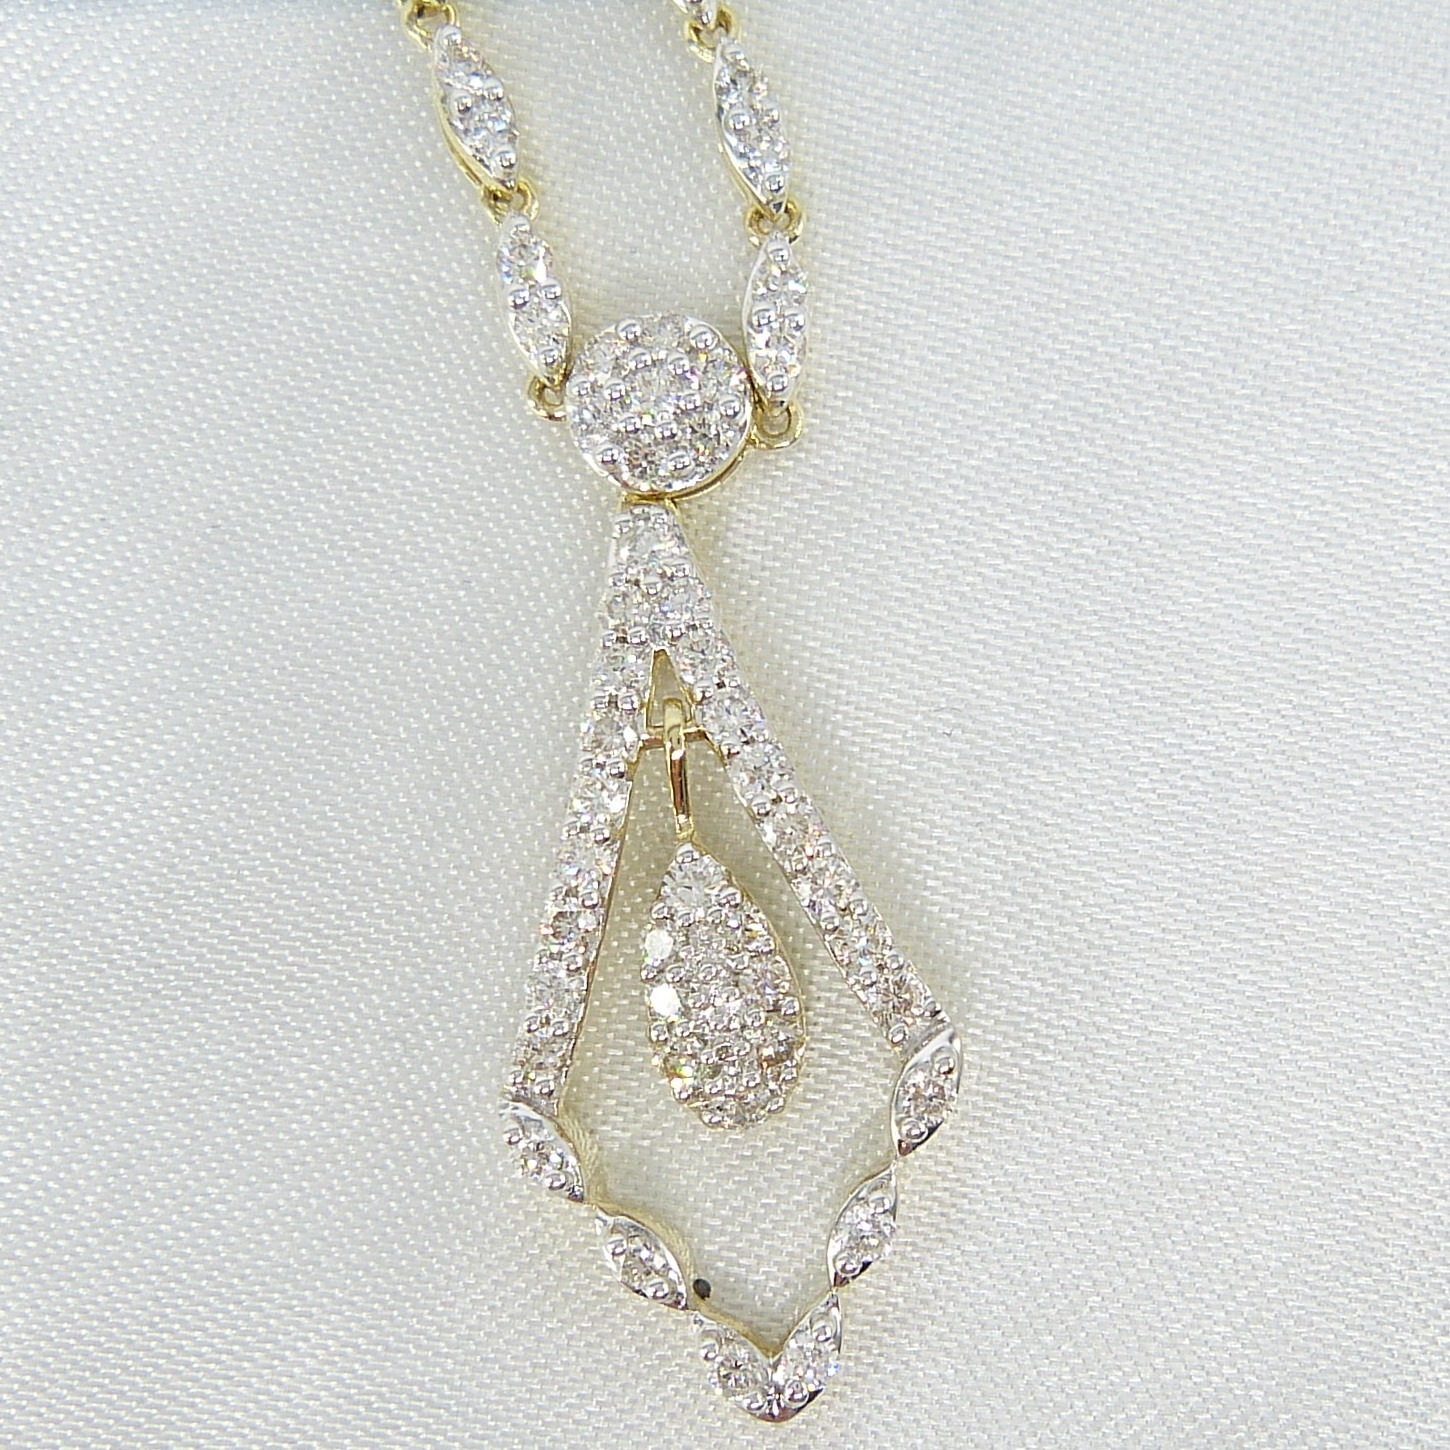 Exquisite Continental-Style Ornate 1.80 Carat Diamond-Set Necklace In 9ct Yellow Gold - Image 5 of 6